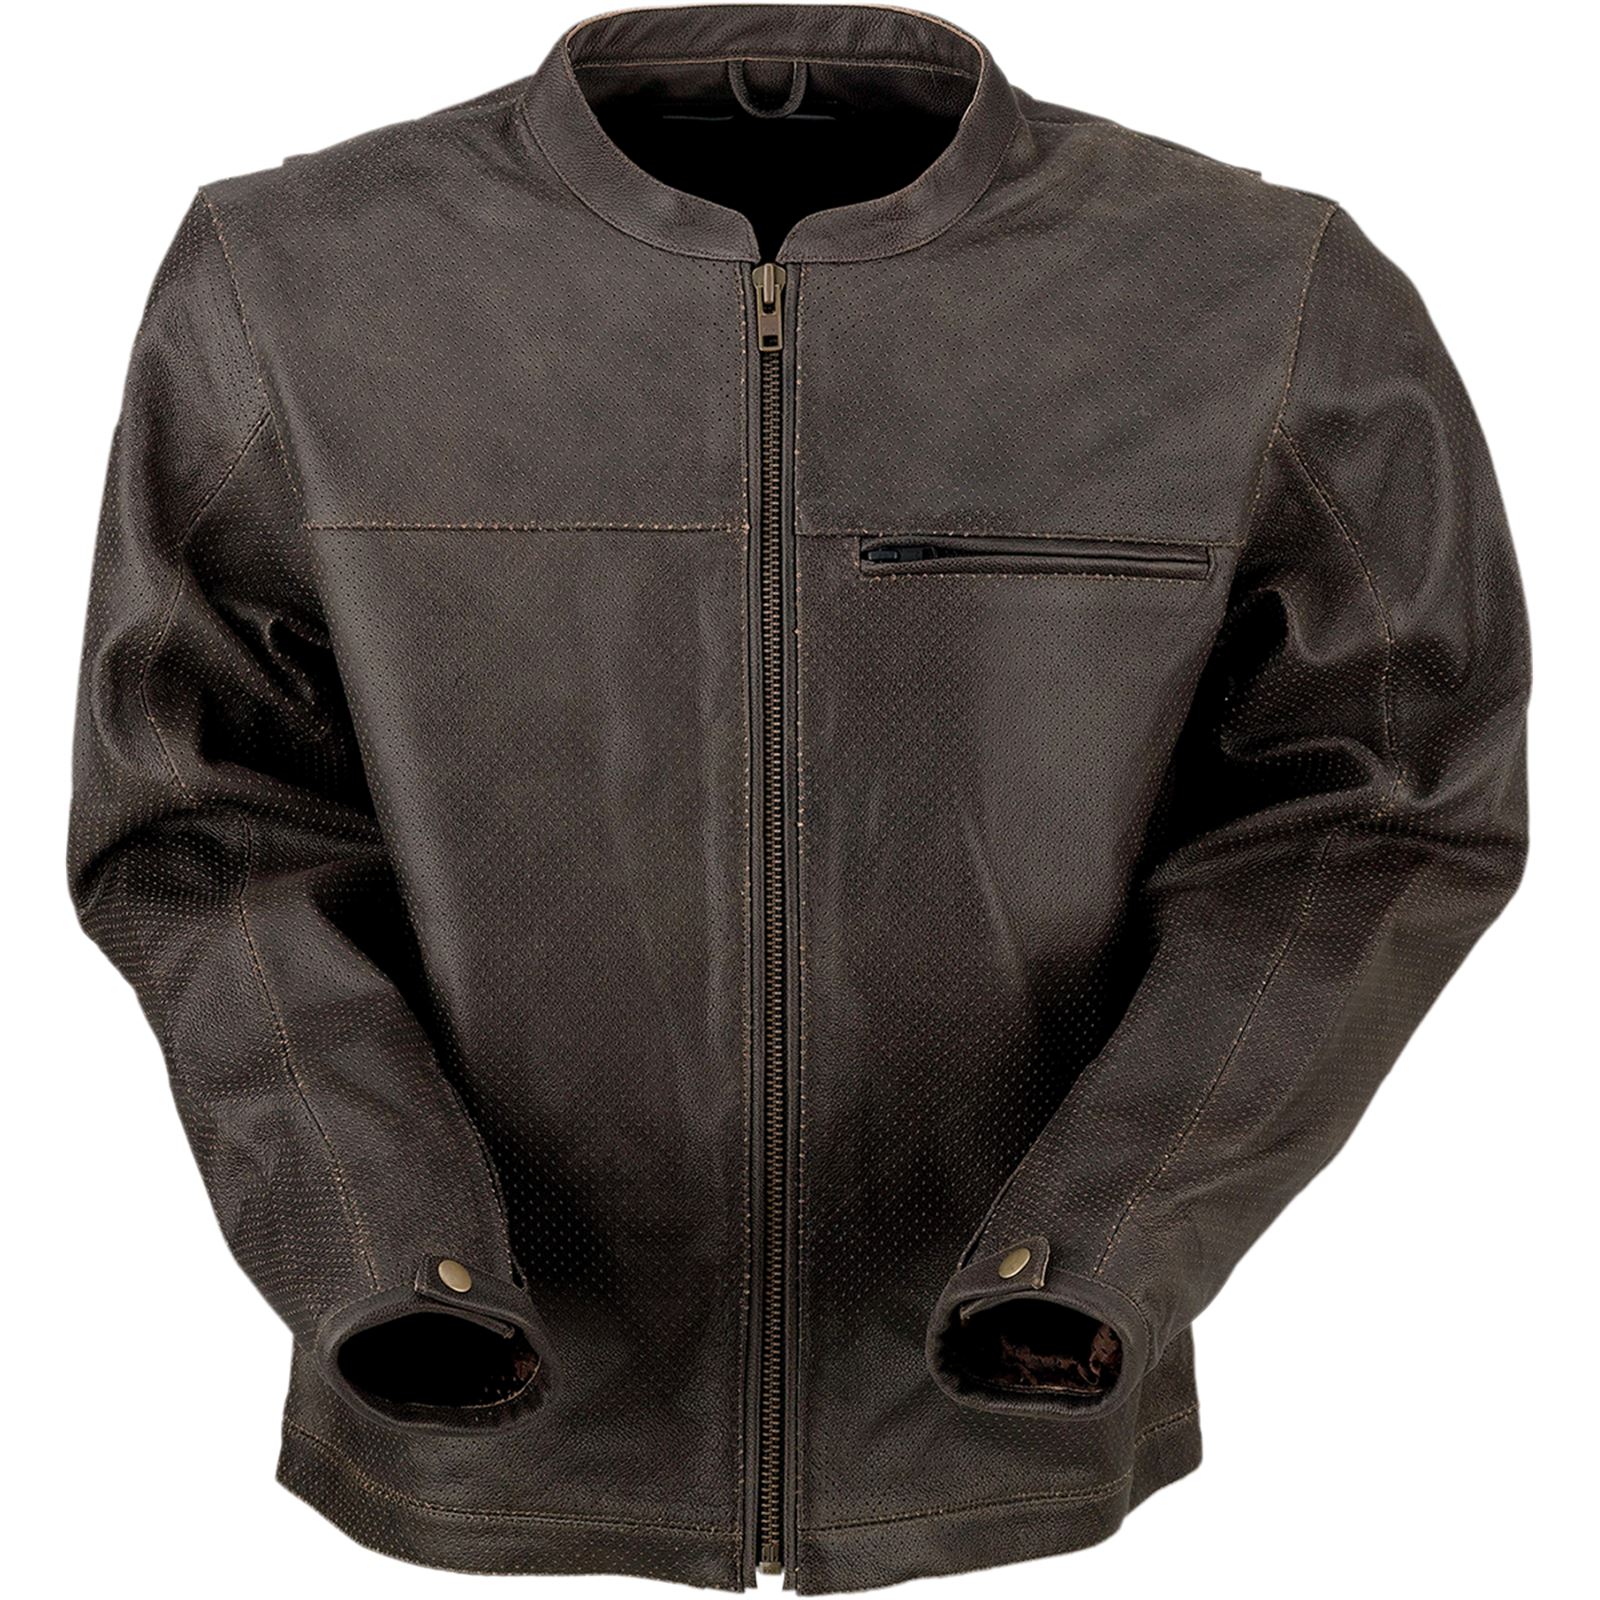 Z1R Munition Perforated Leather Jacket - Brown - 4XL